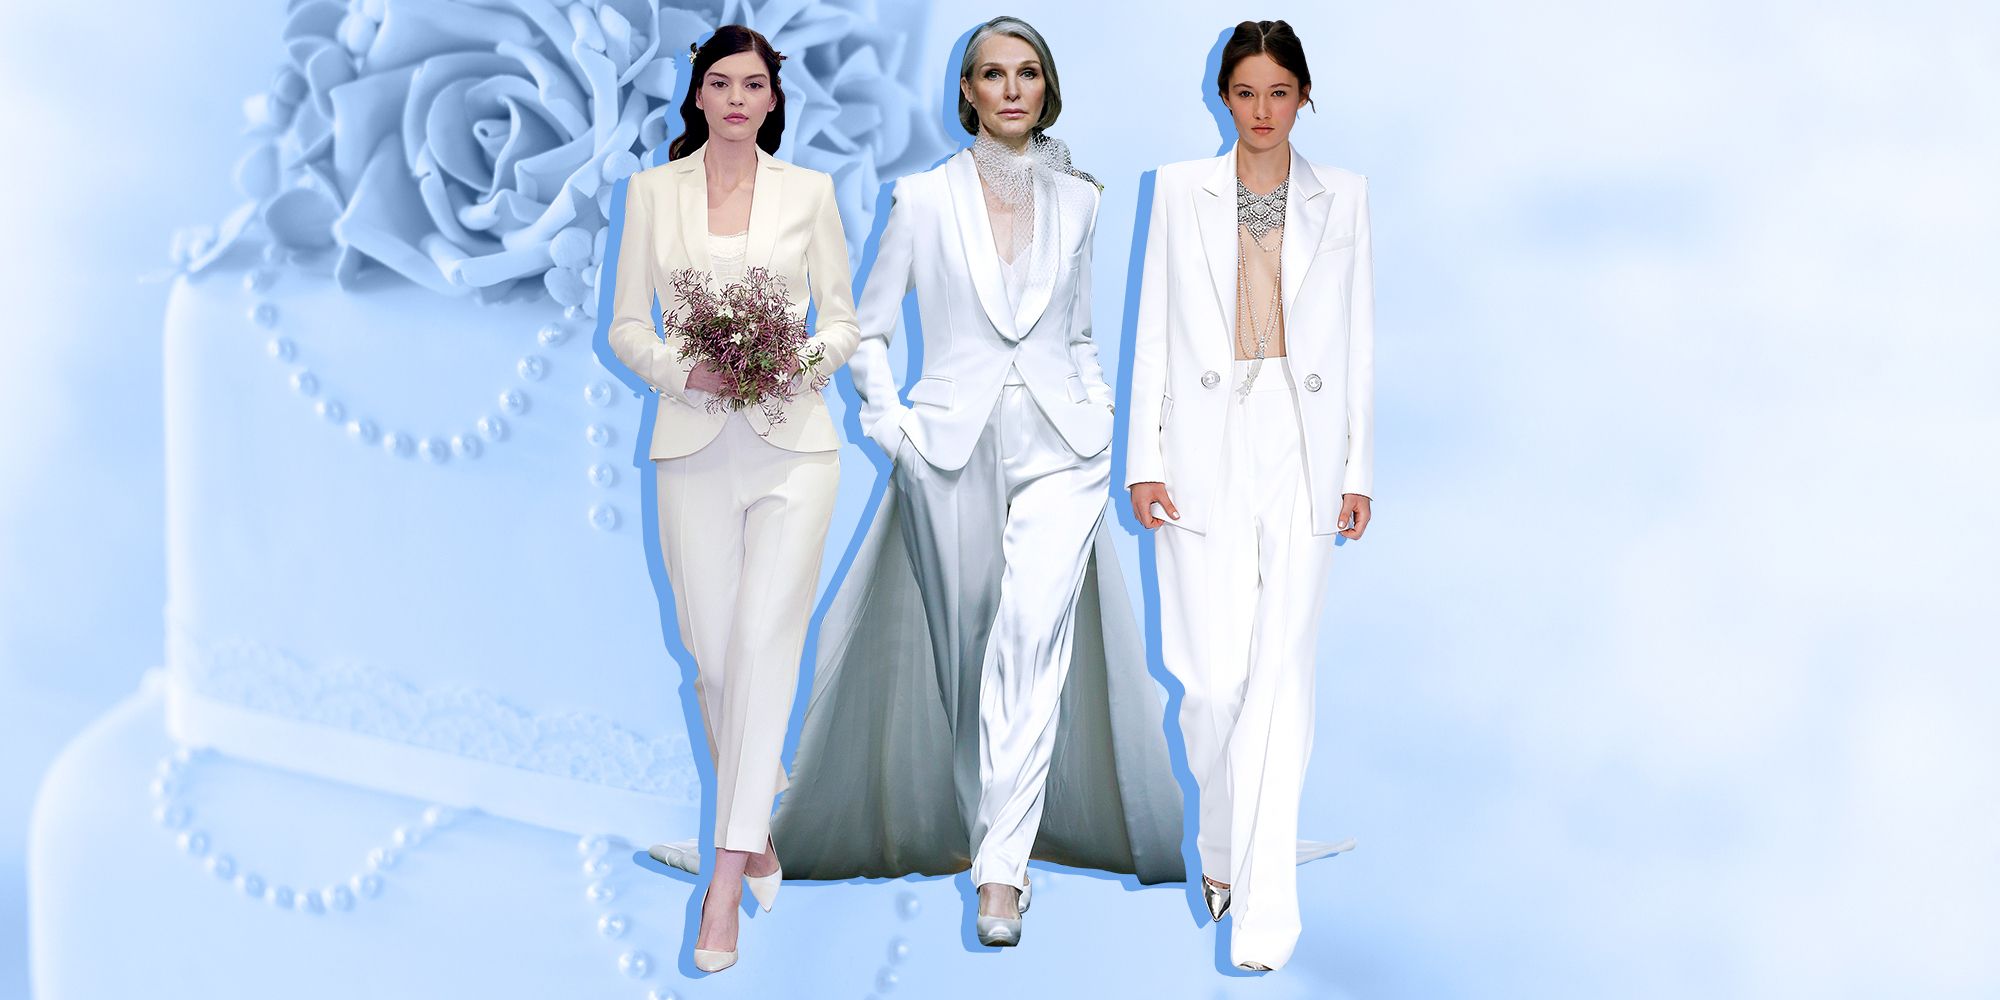 skirt suits for weddings